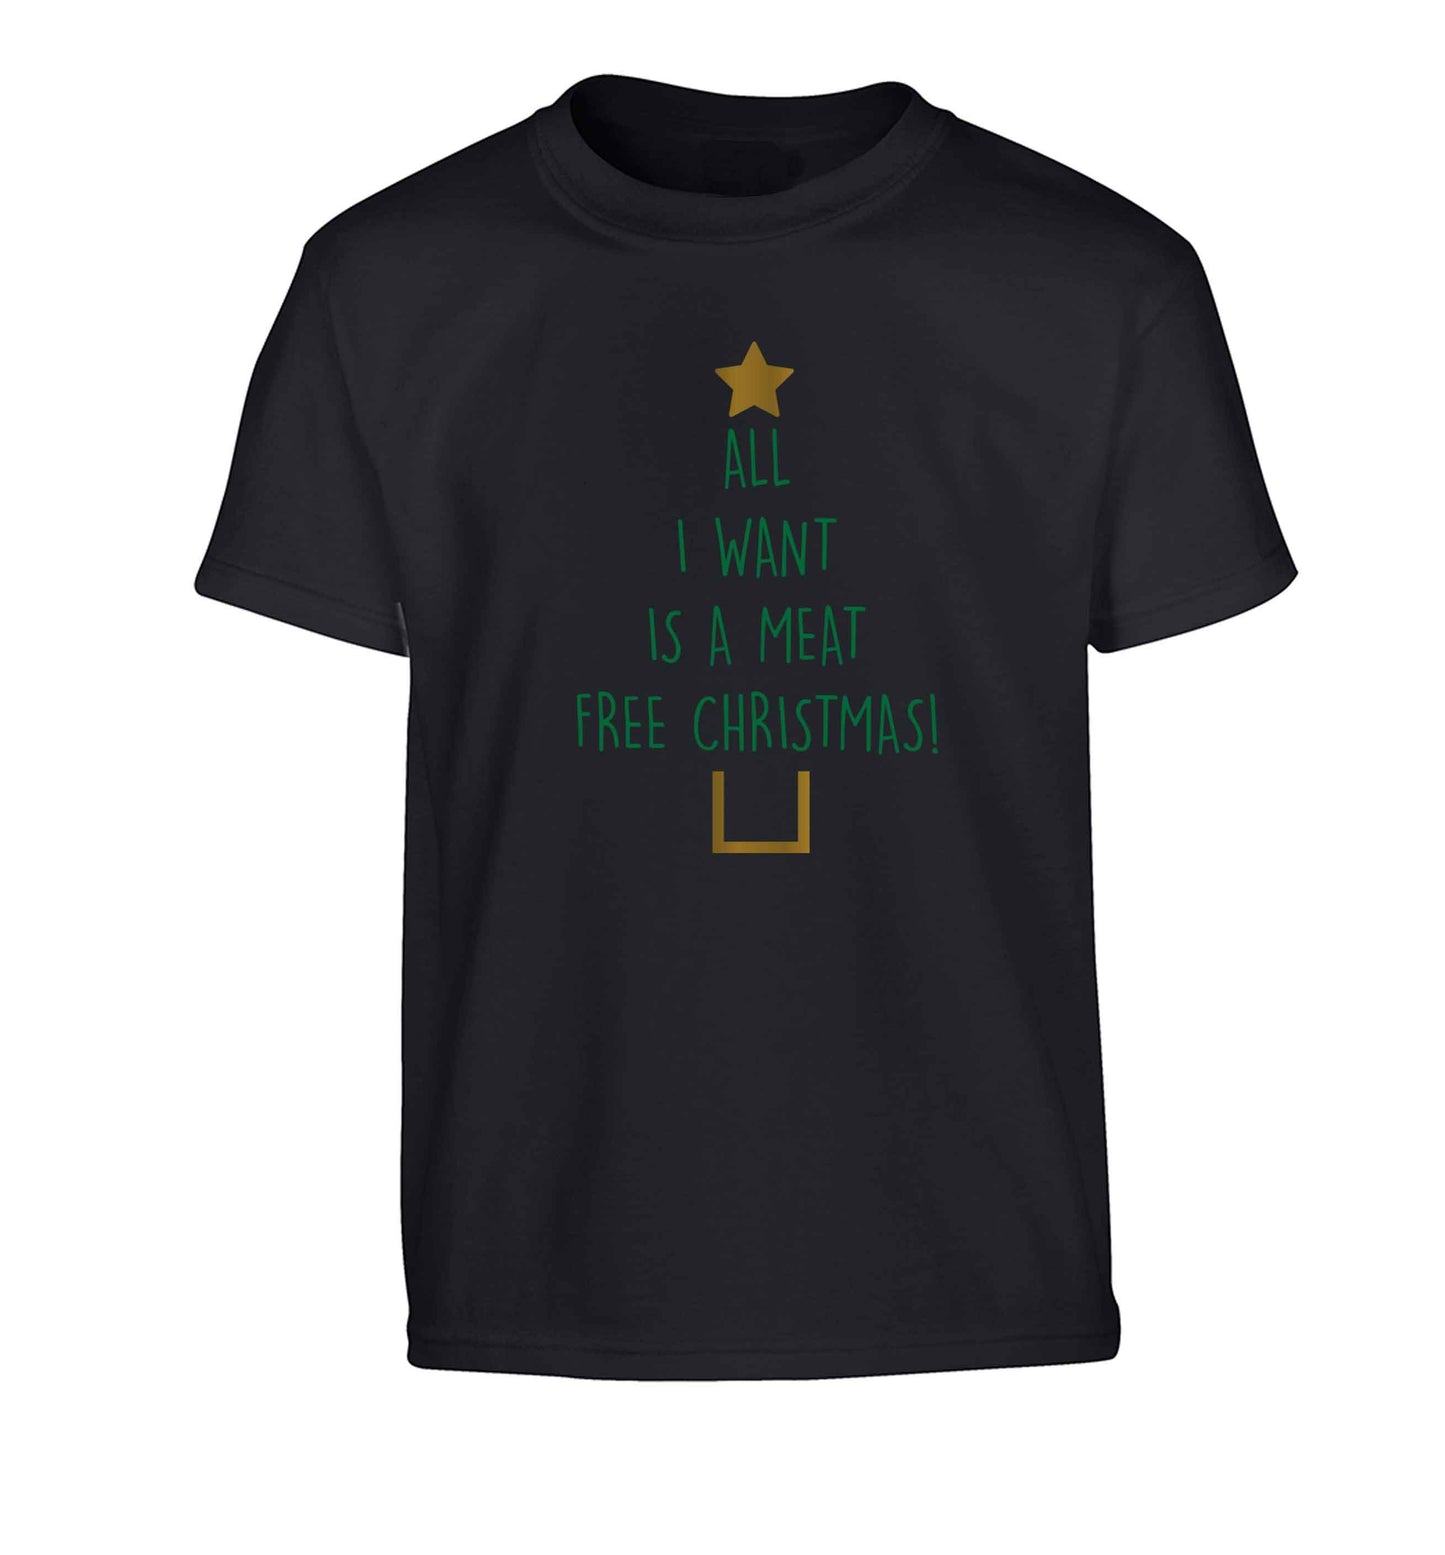 All I want is a meat free Christmas Children's black Tshirt 12-13 Years